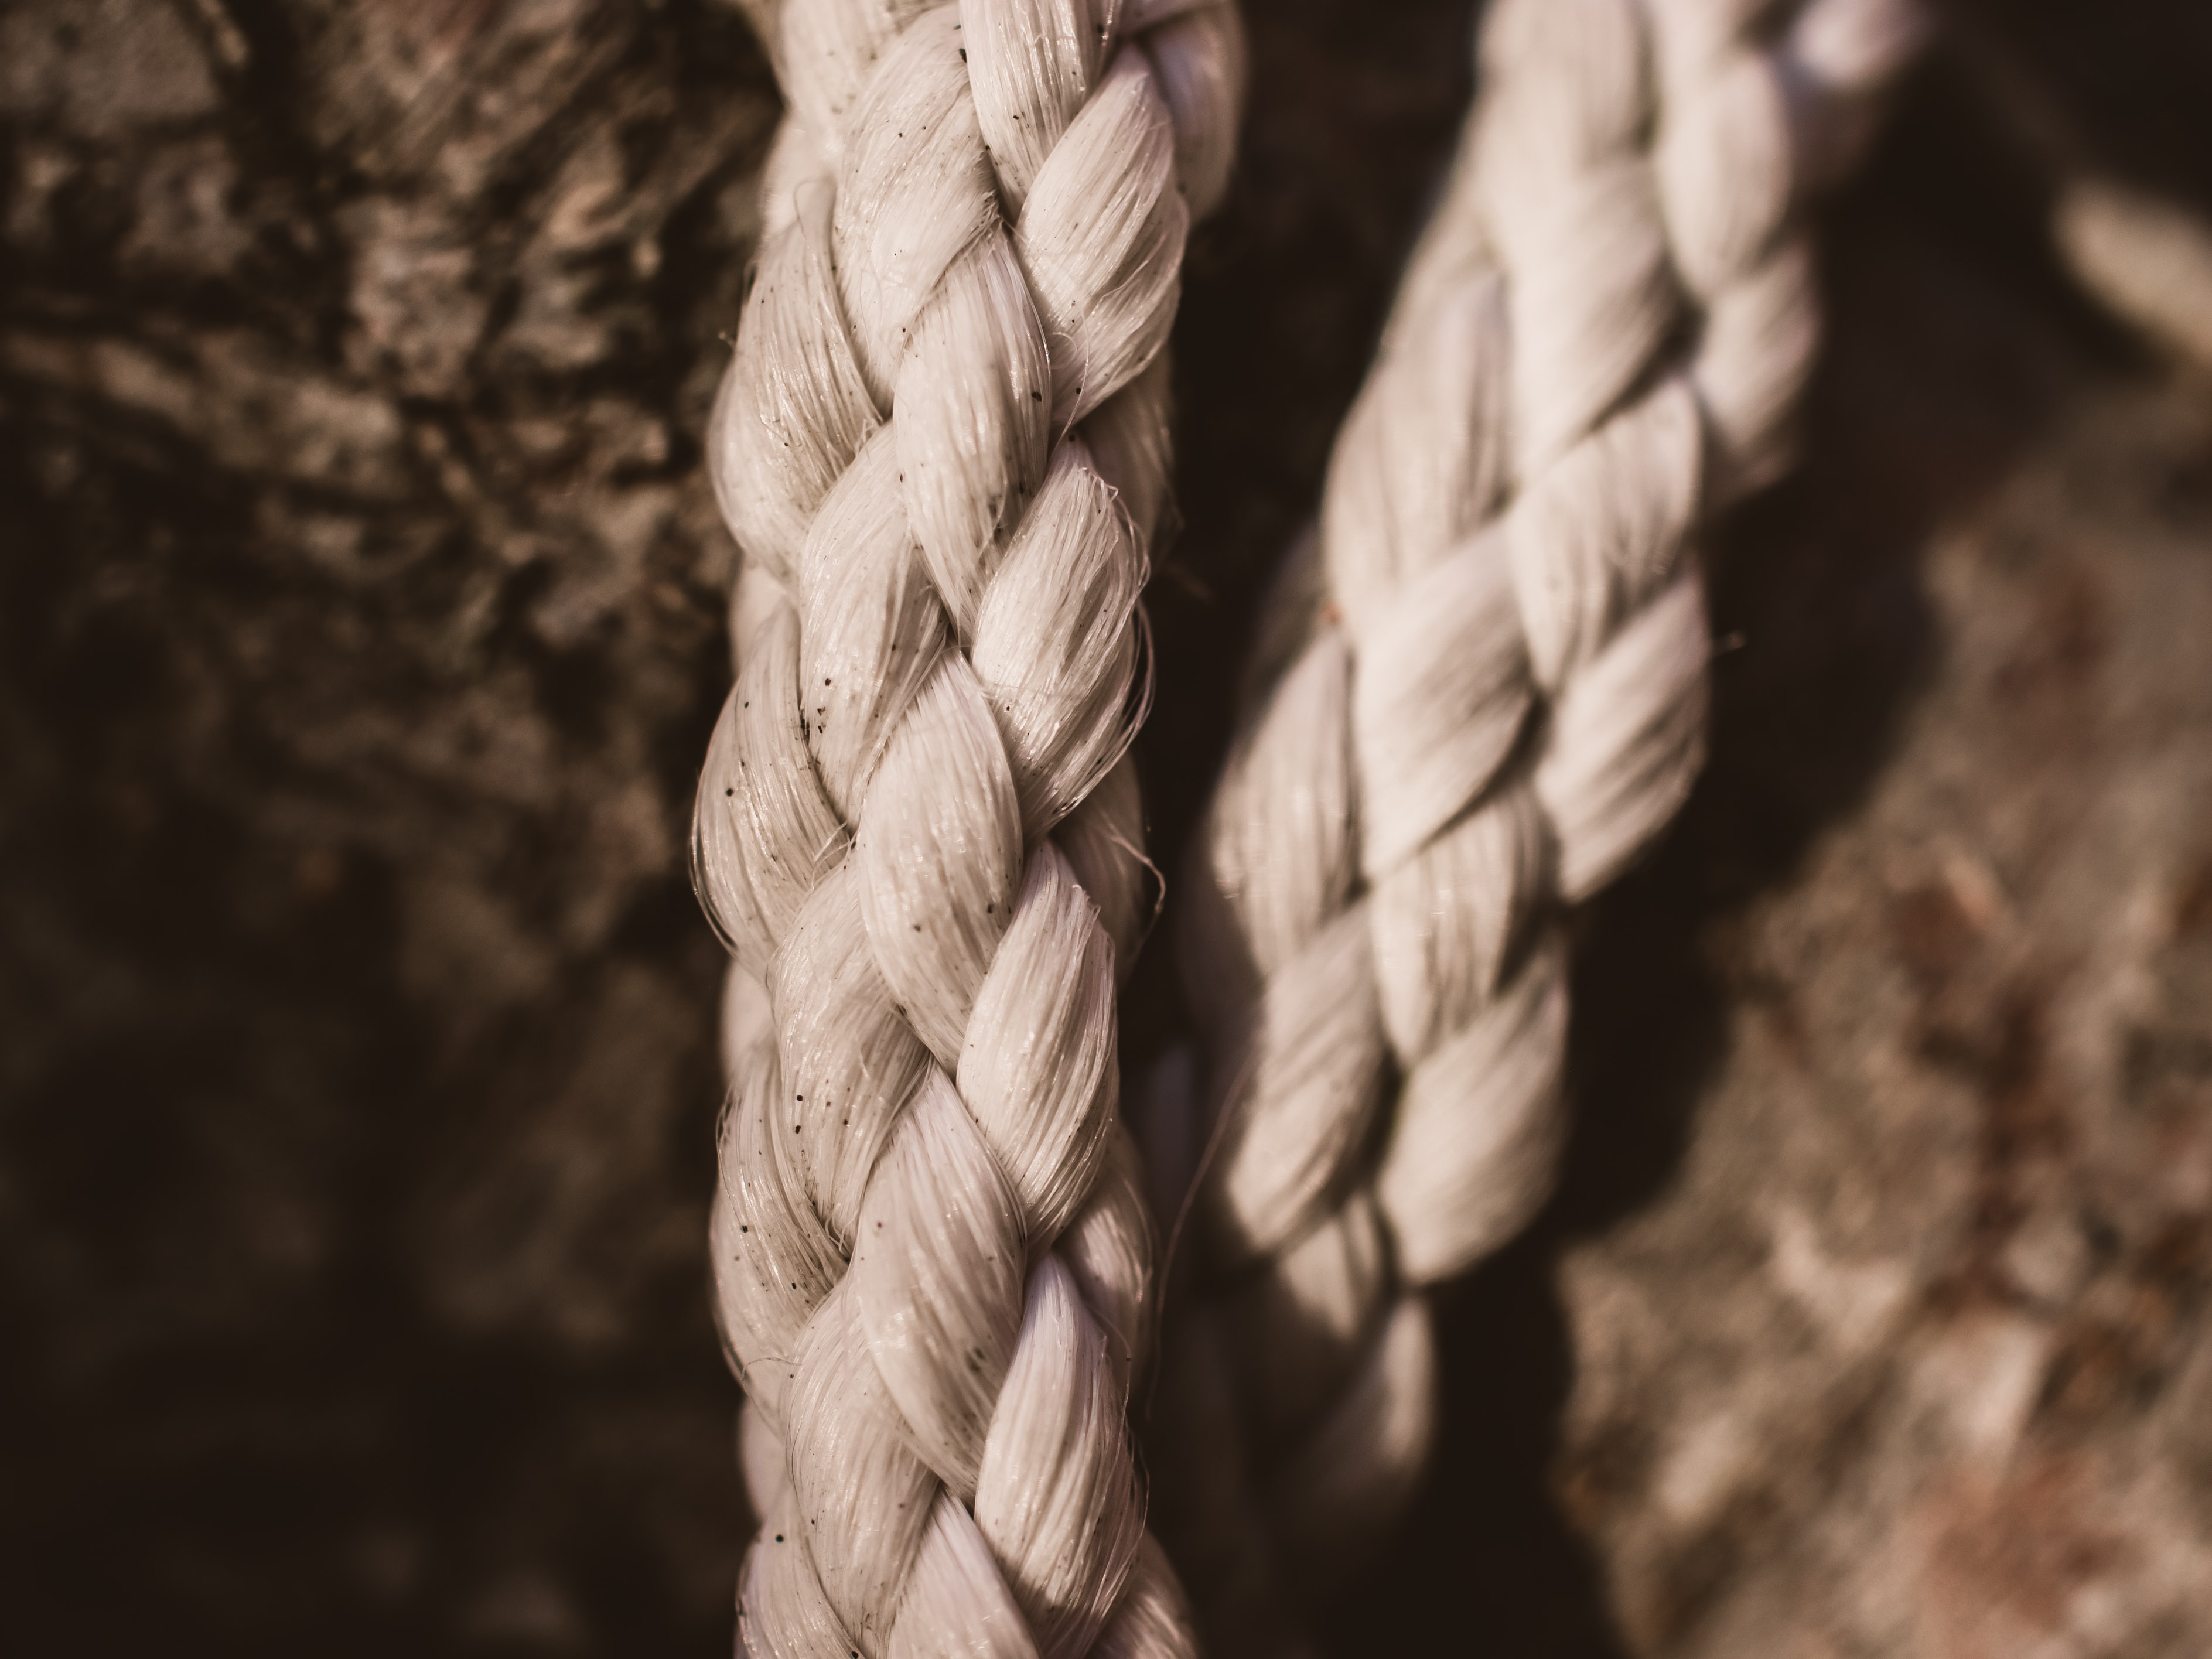 The Braided Essay – moving writers